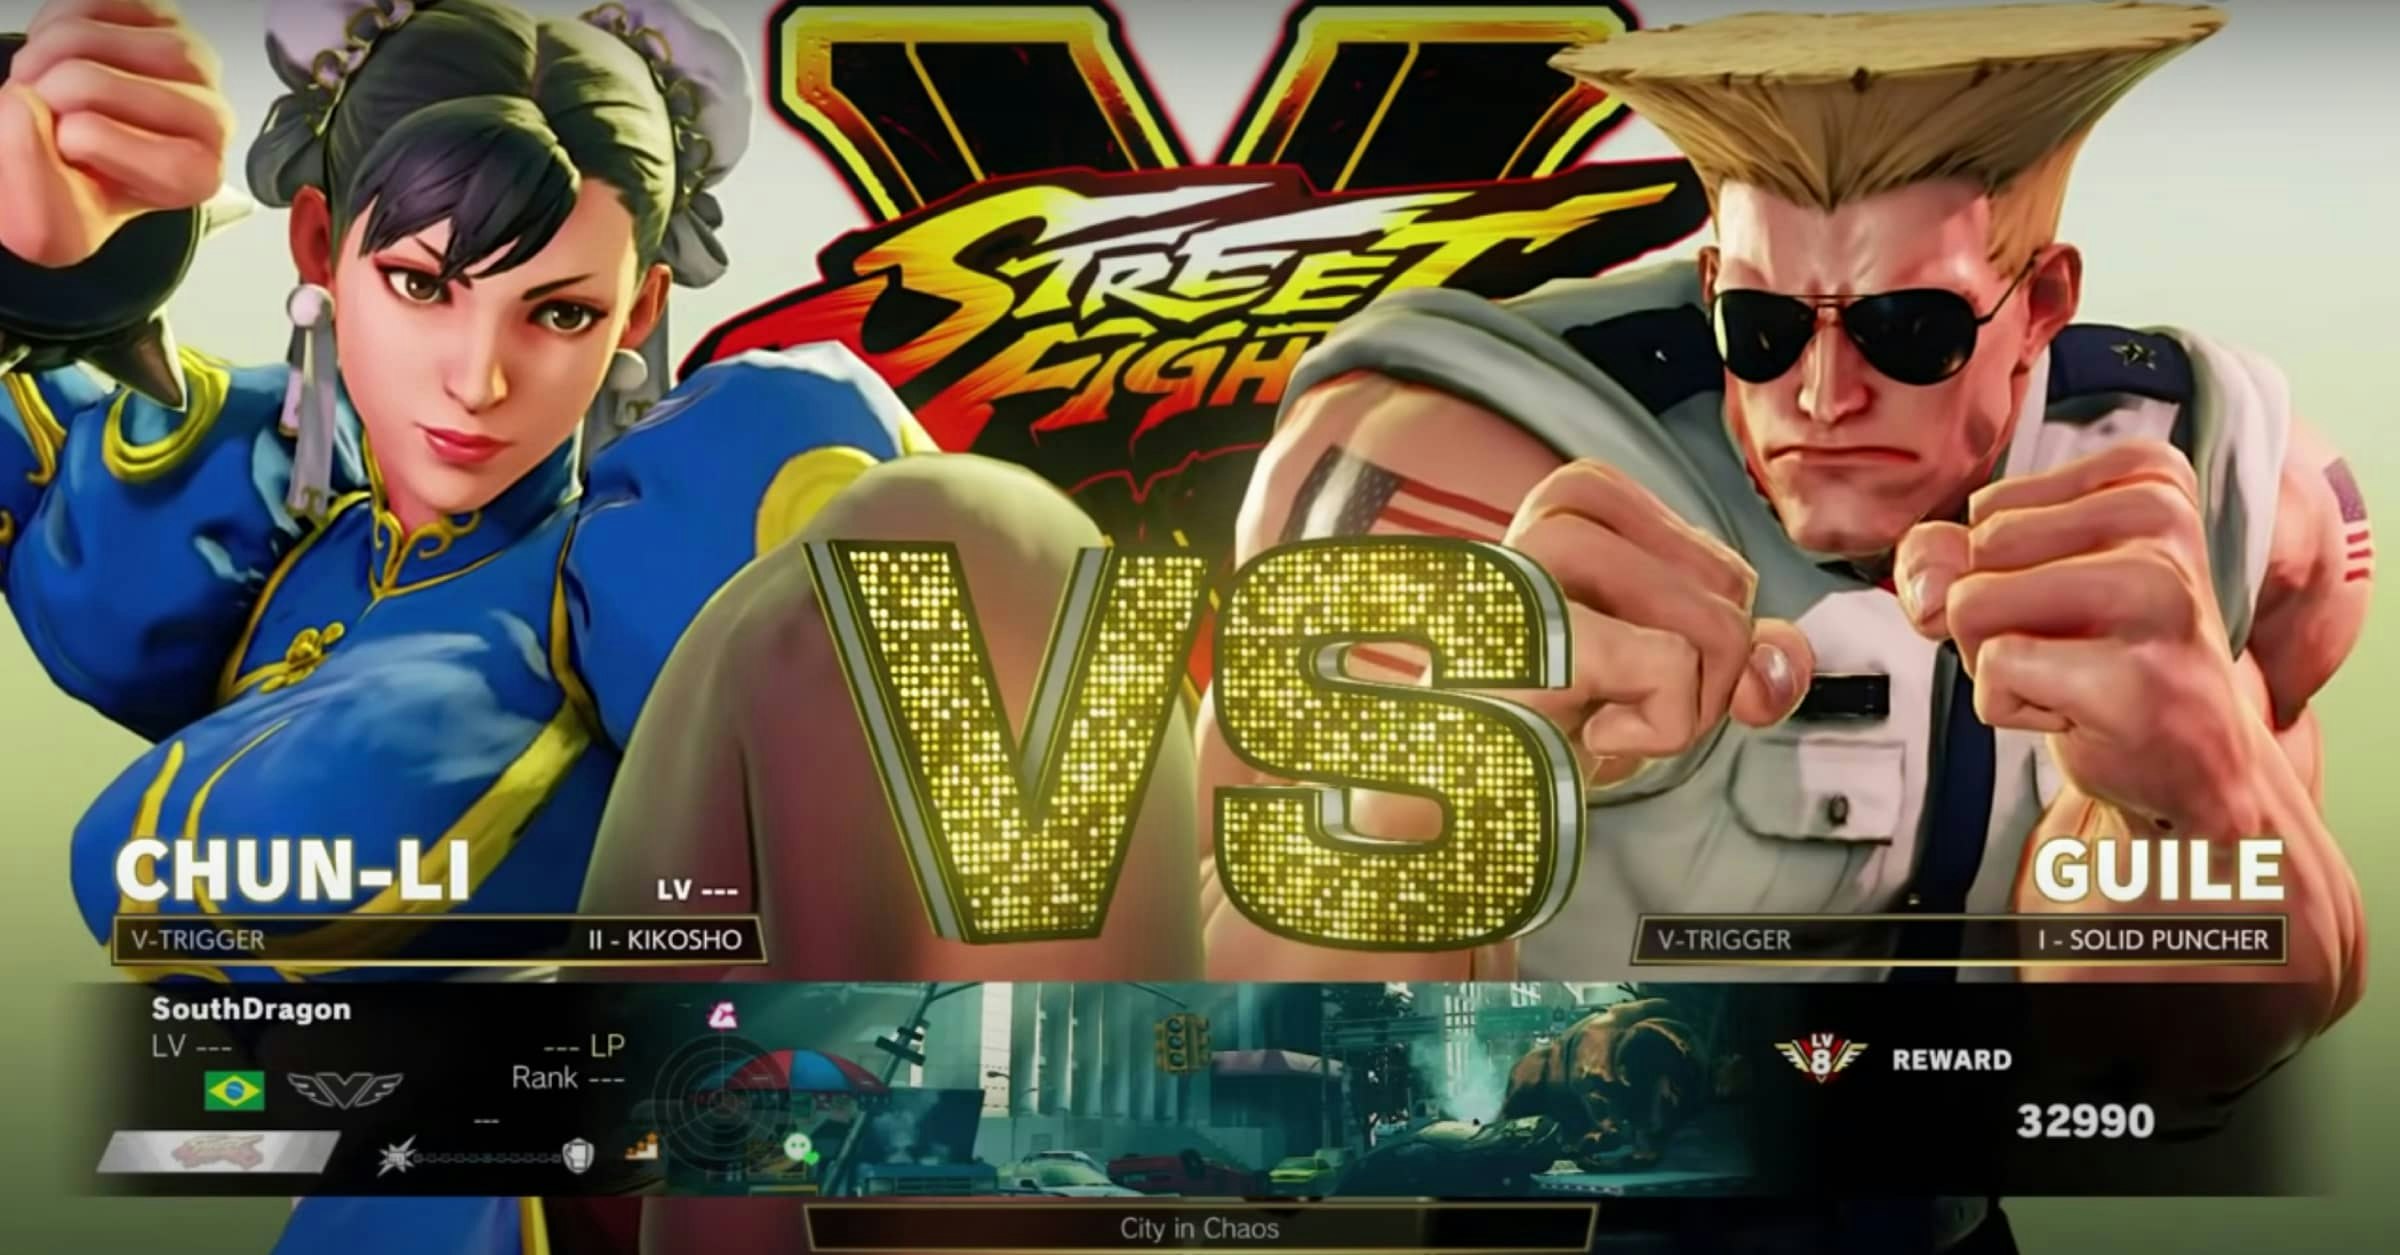 'Victory will come': A guide to Street Fighter V betting